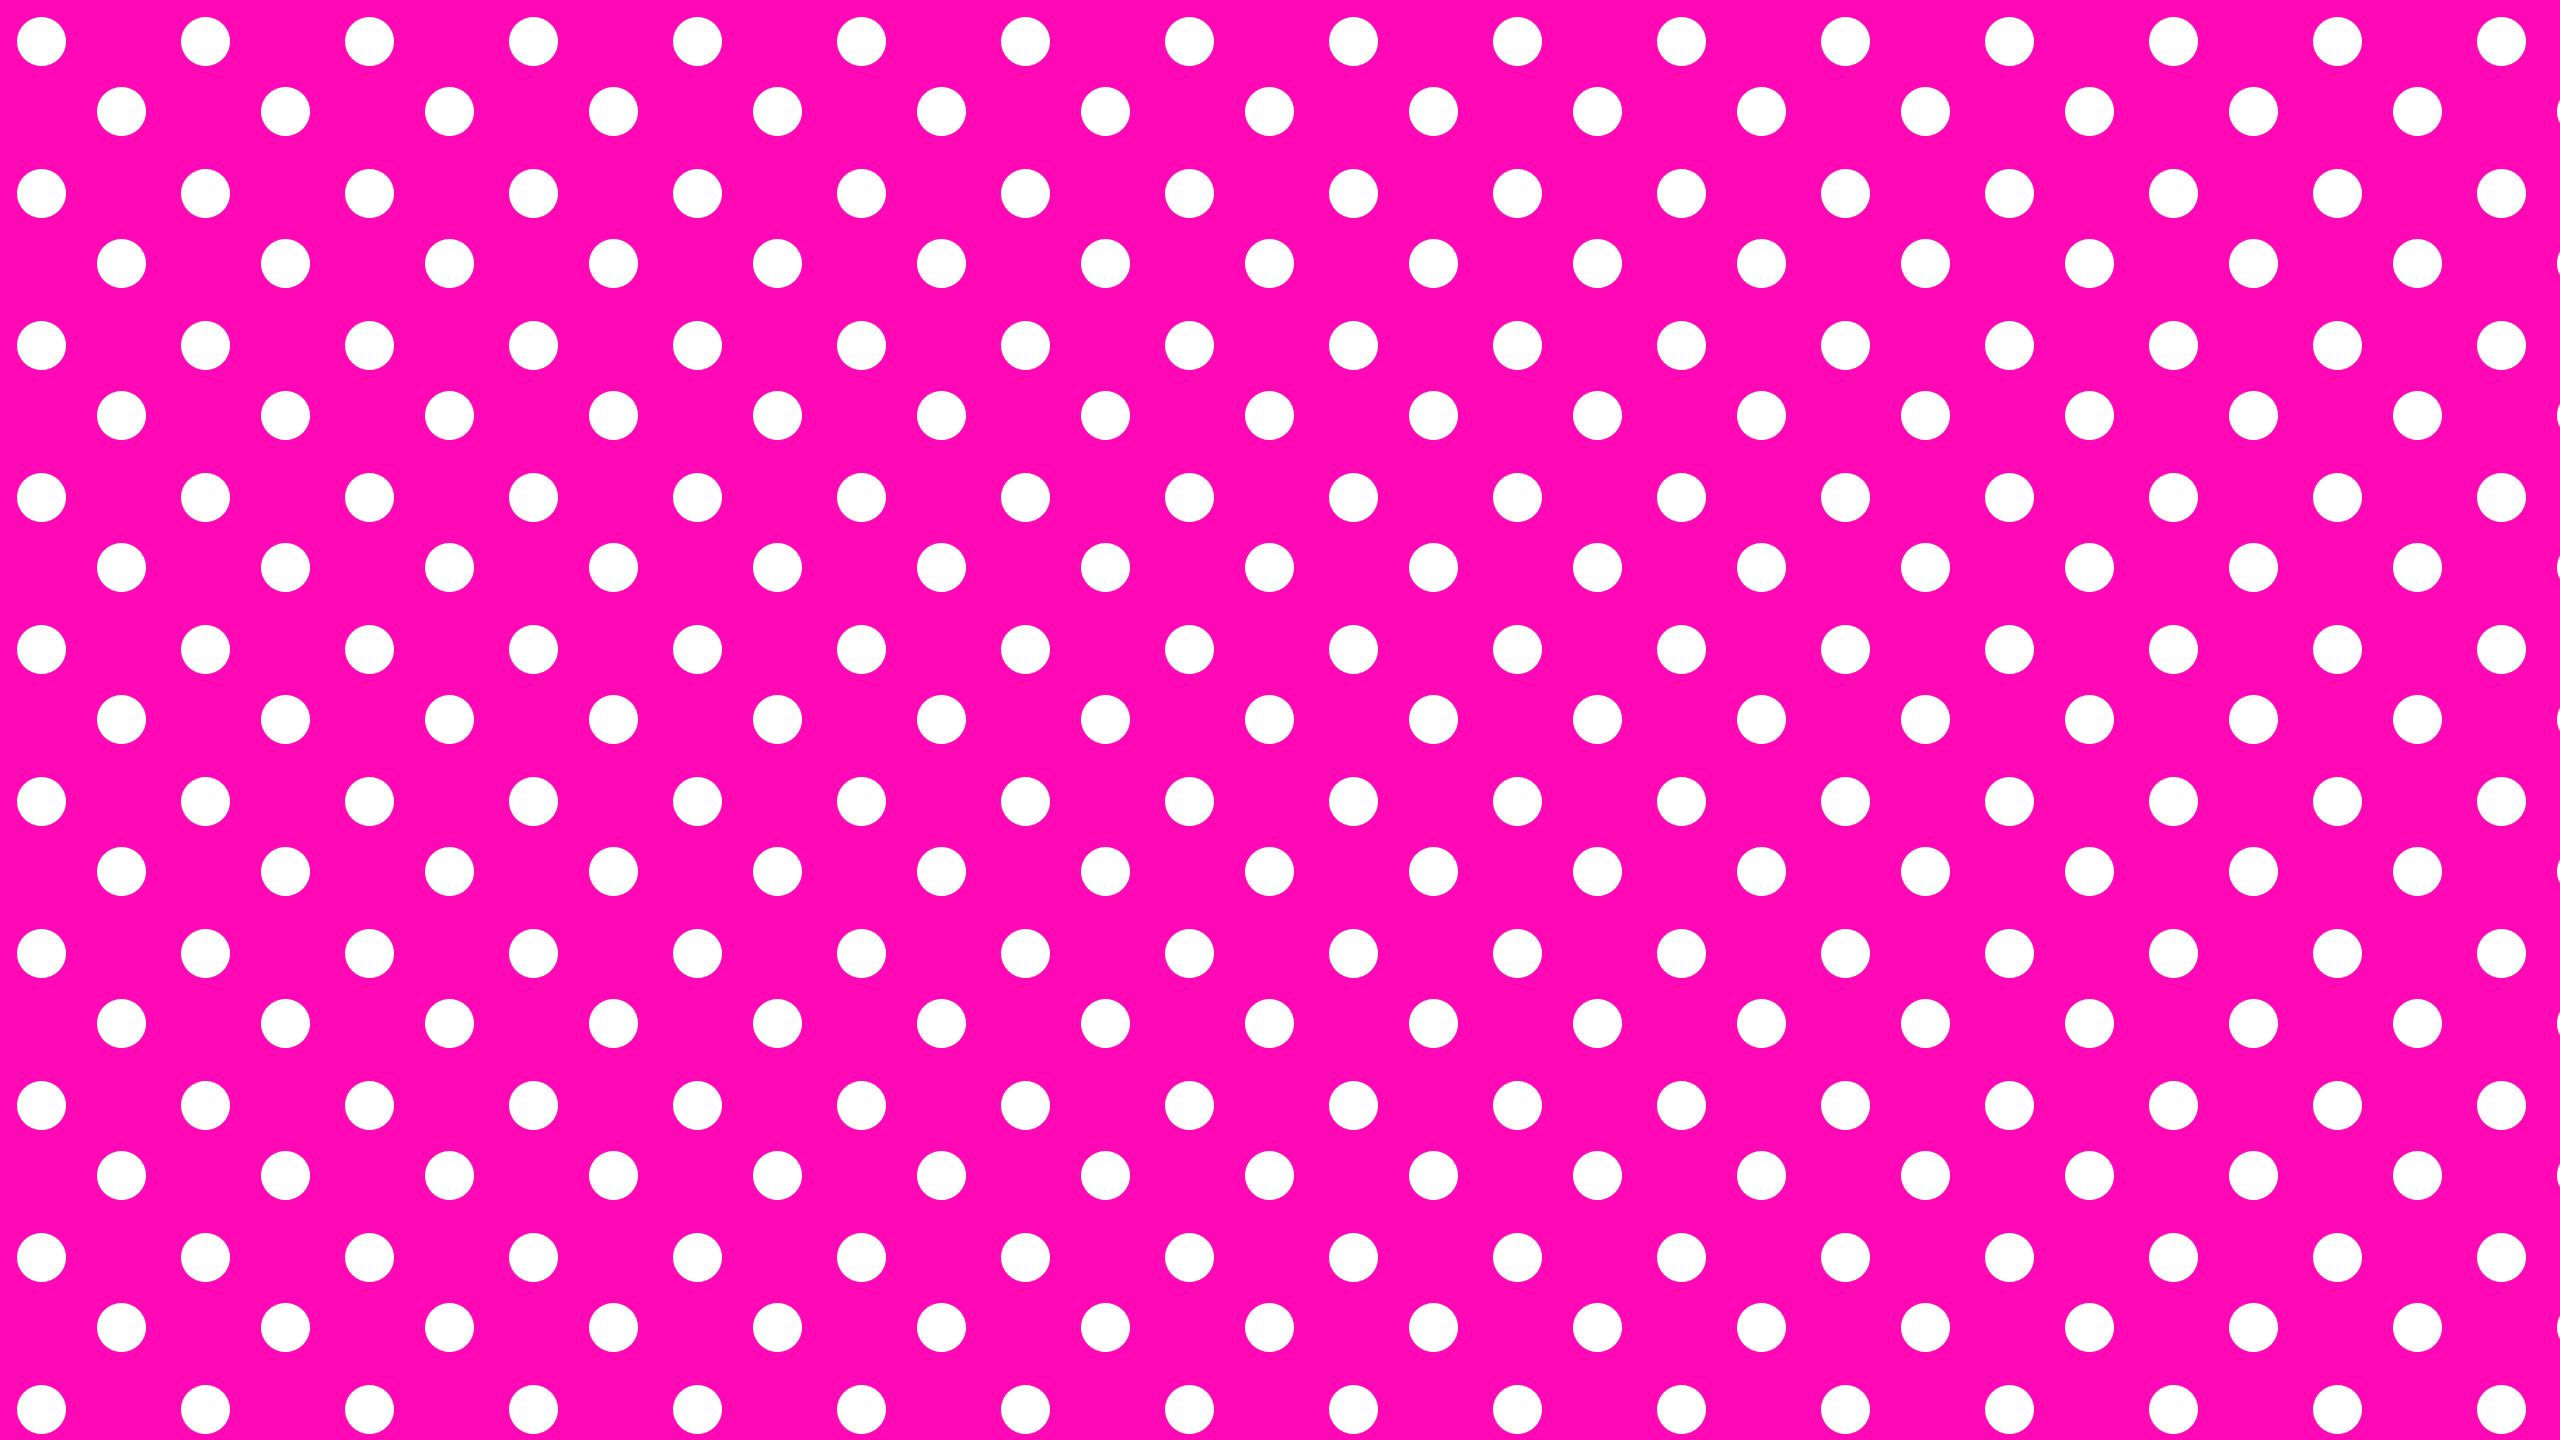 This Large Pink Desktop Wallpaper Is Easy Just Save